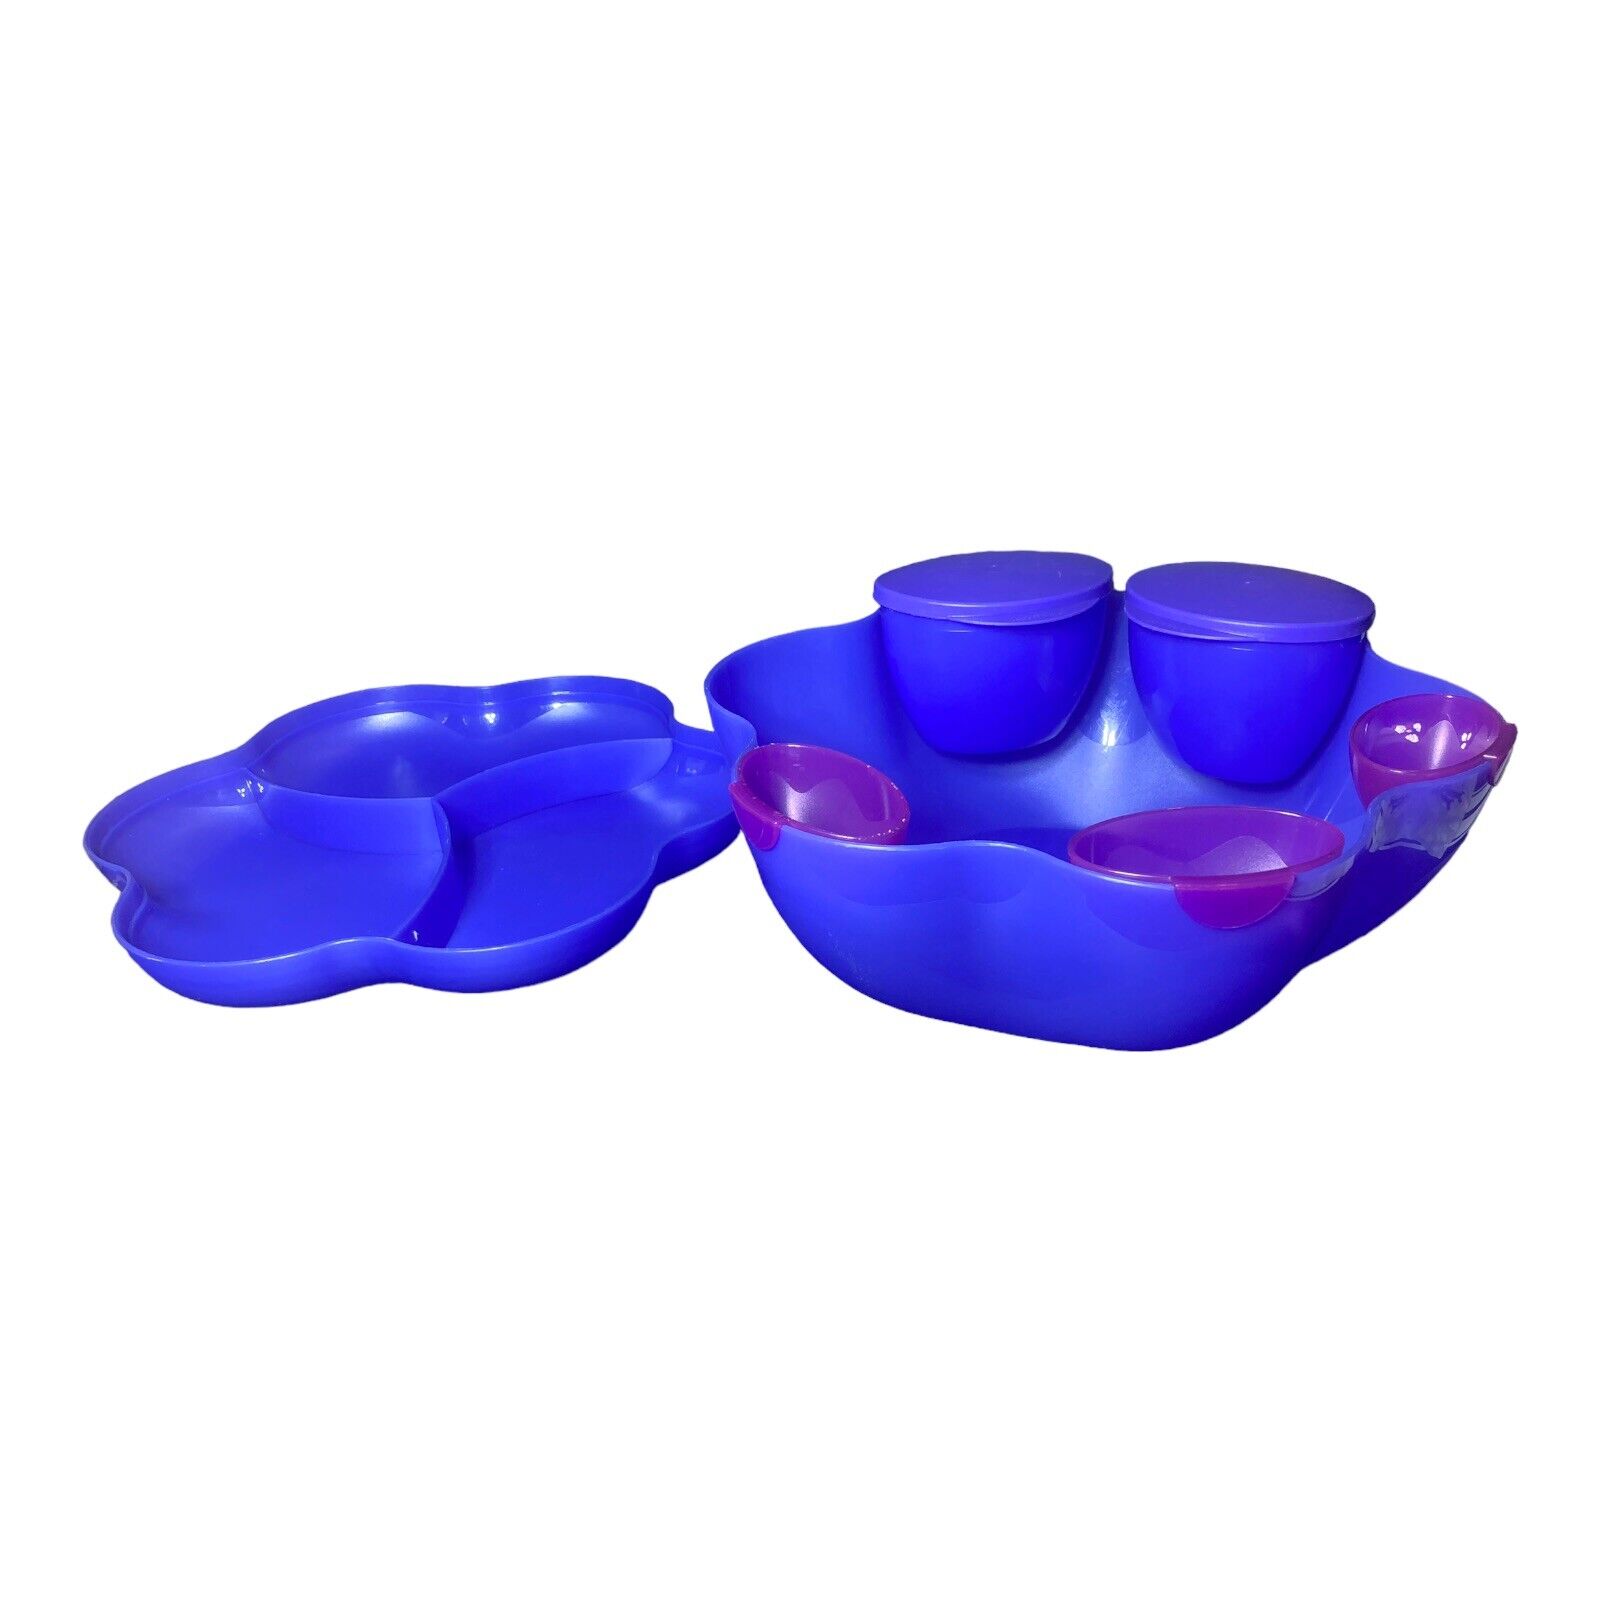 TUPPERWARE 9-pc. Scalloped Chip Salad Snack Serving Bowl/Dip Bowls Blue 4624 A-2